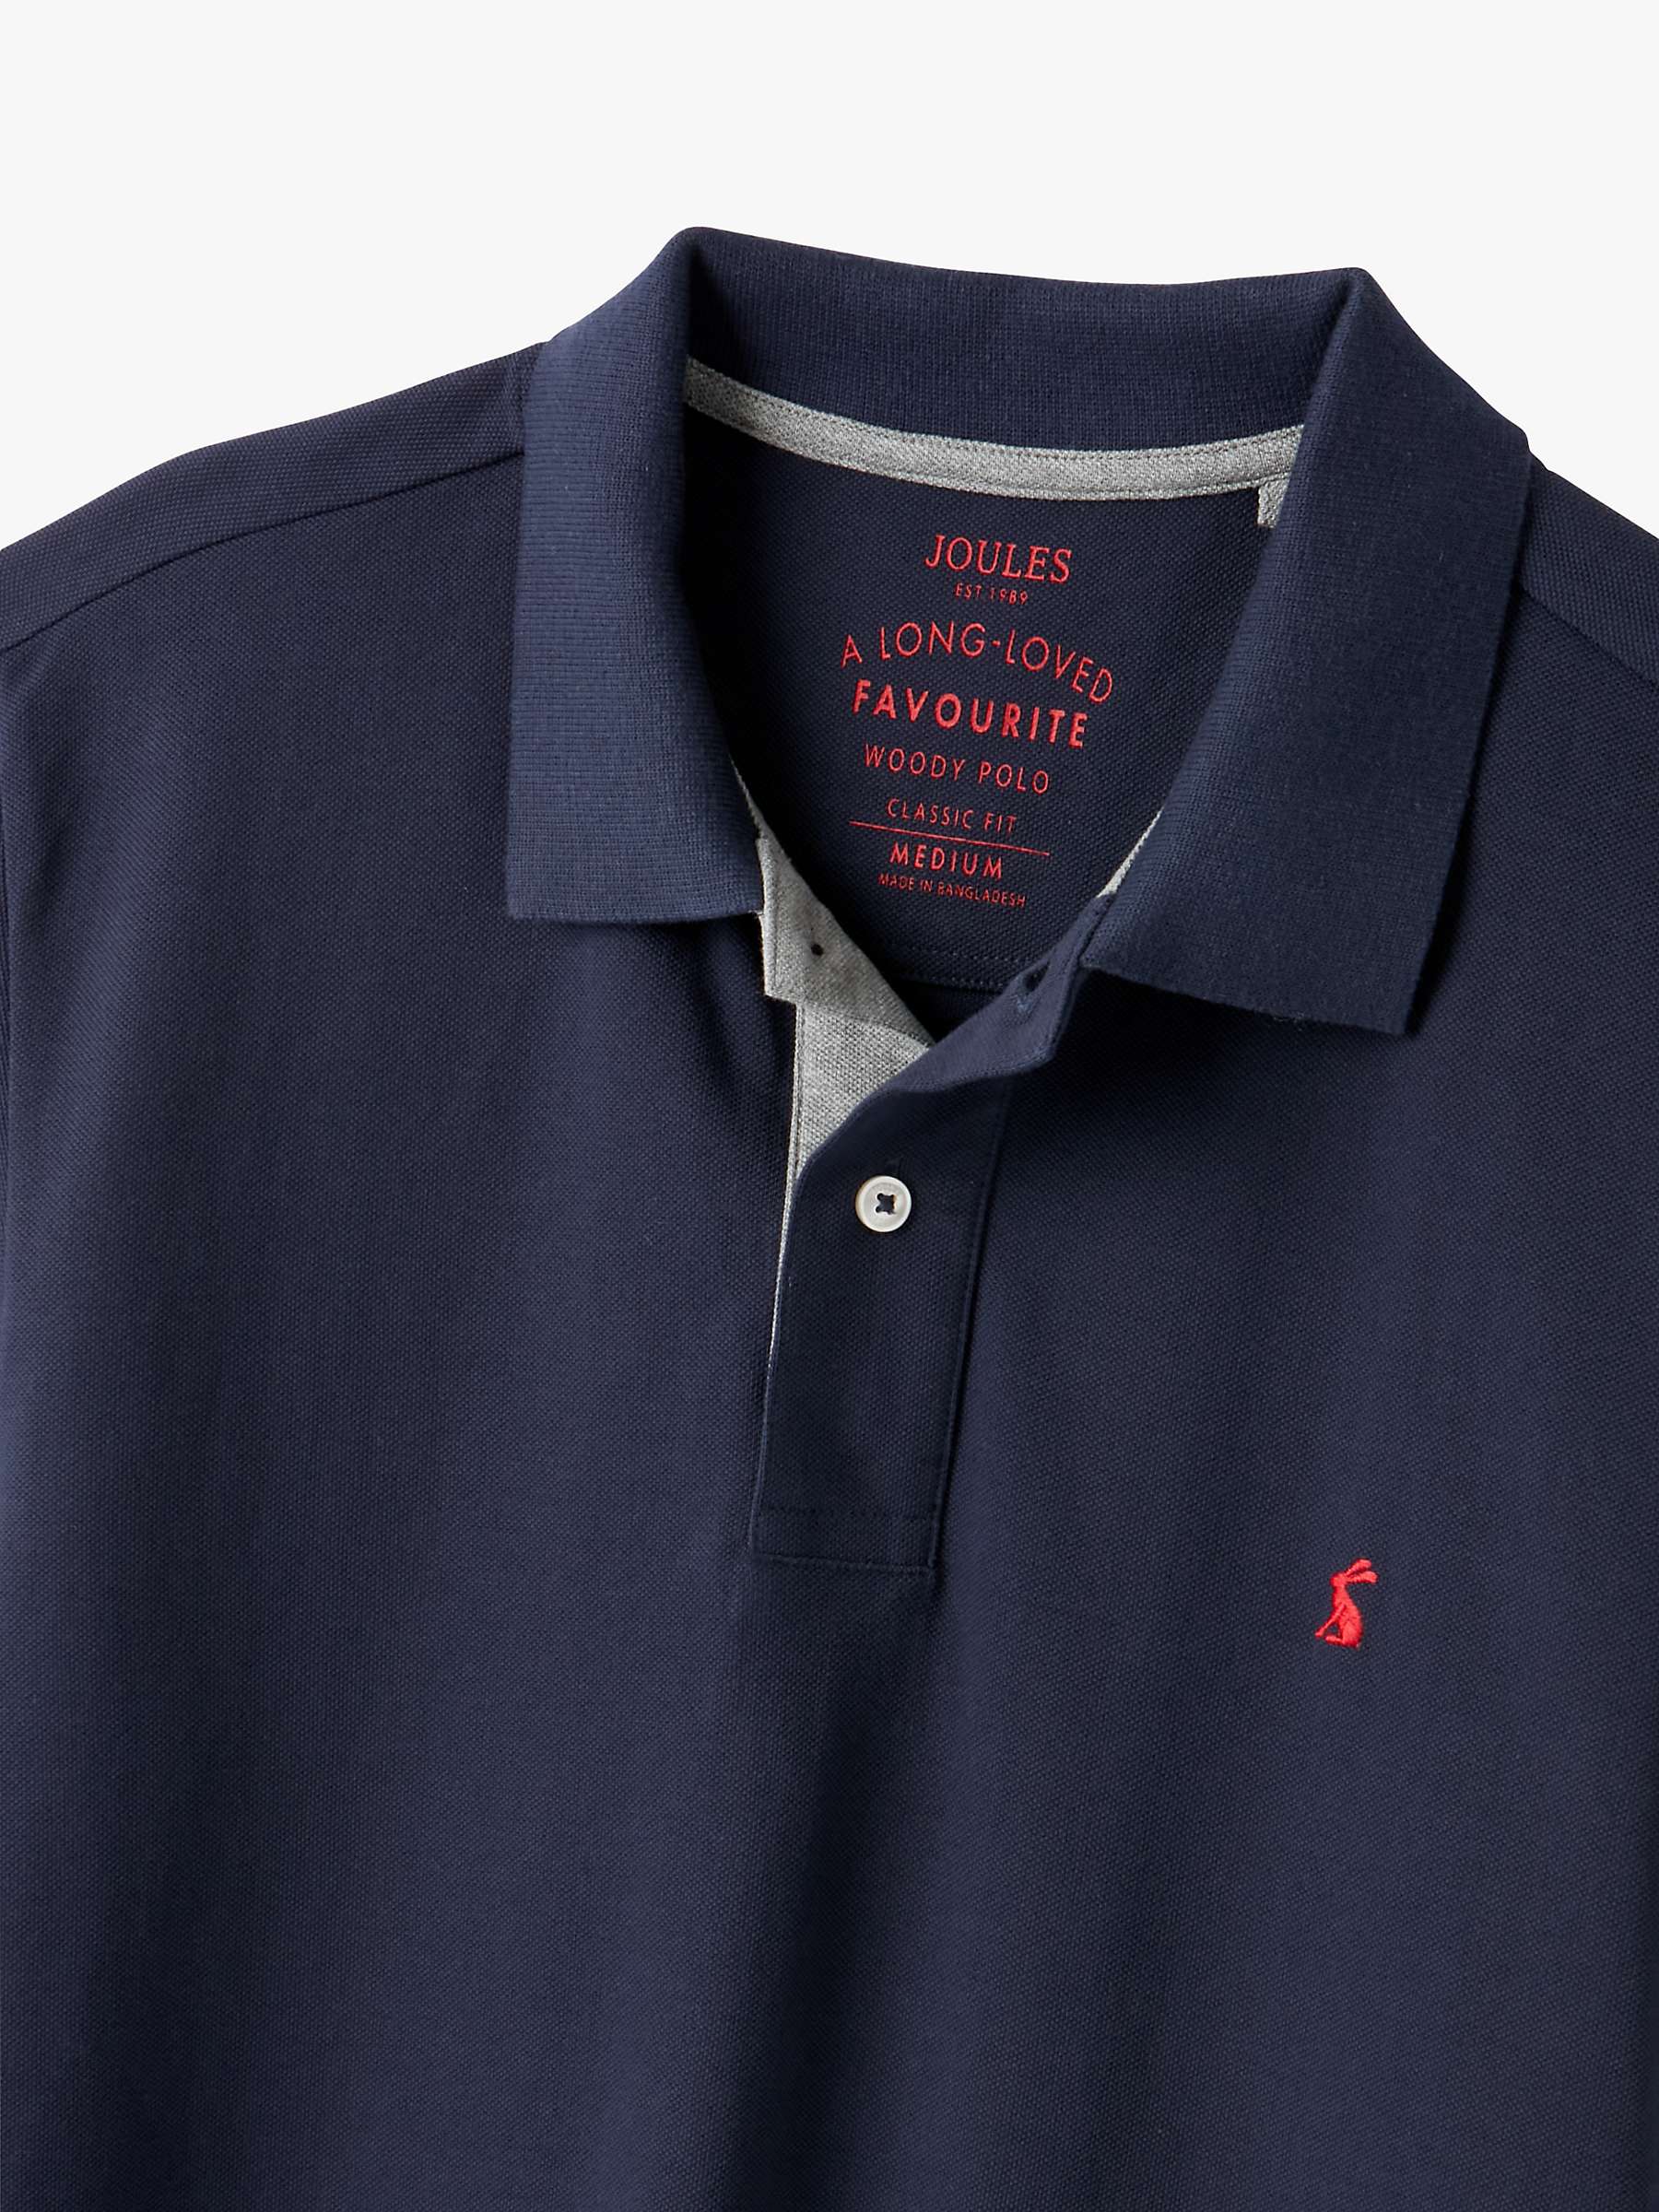 Buy Joules Classic Fit Polo Shirt Online at johnlewis.com